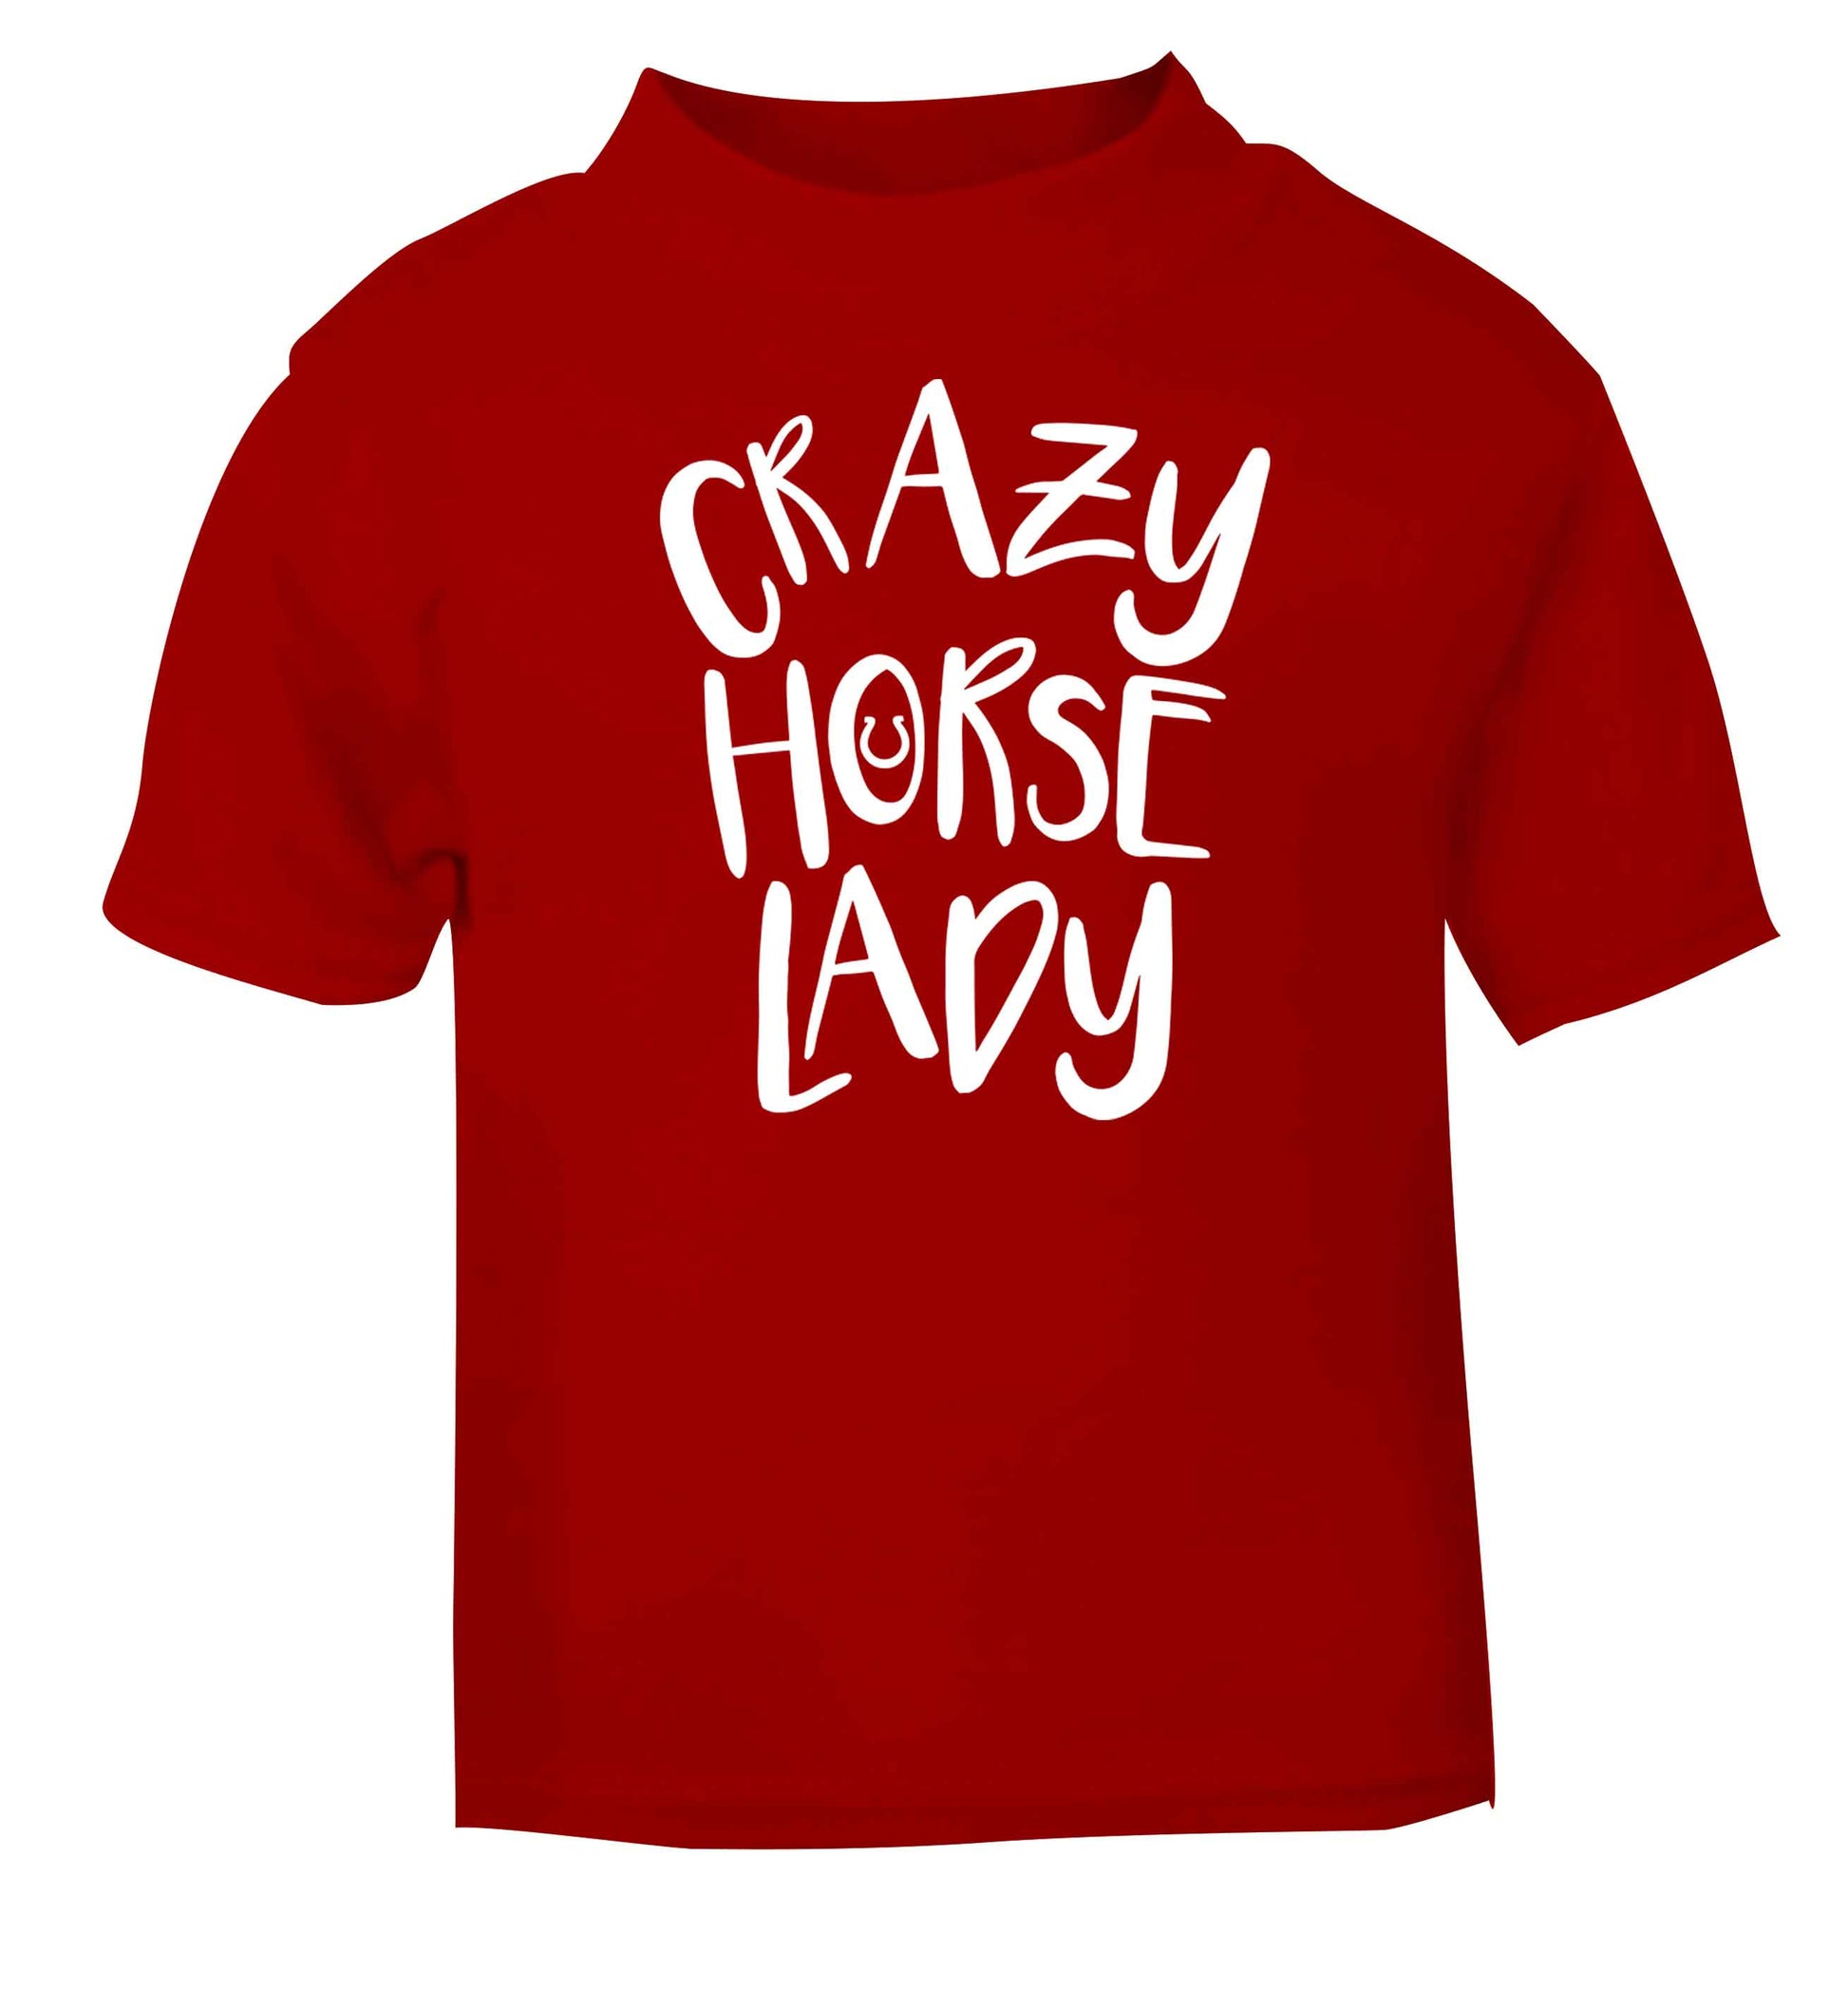 Crazy horse lady red baby toddler Tshirt 2 Years